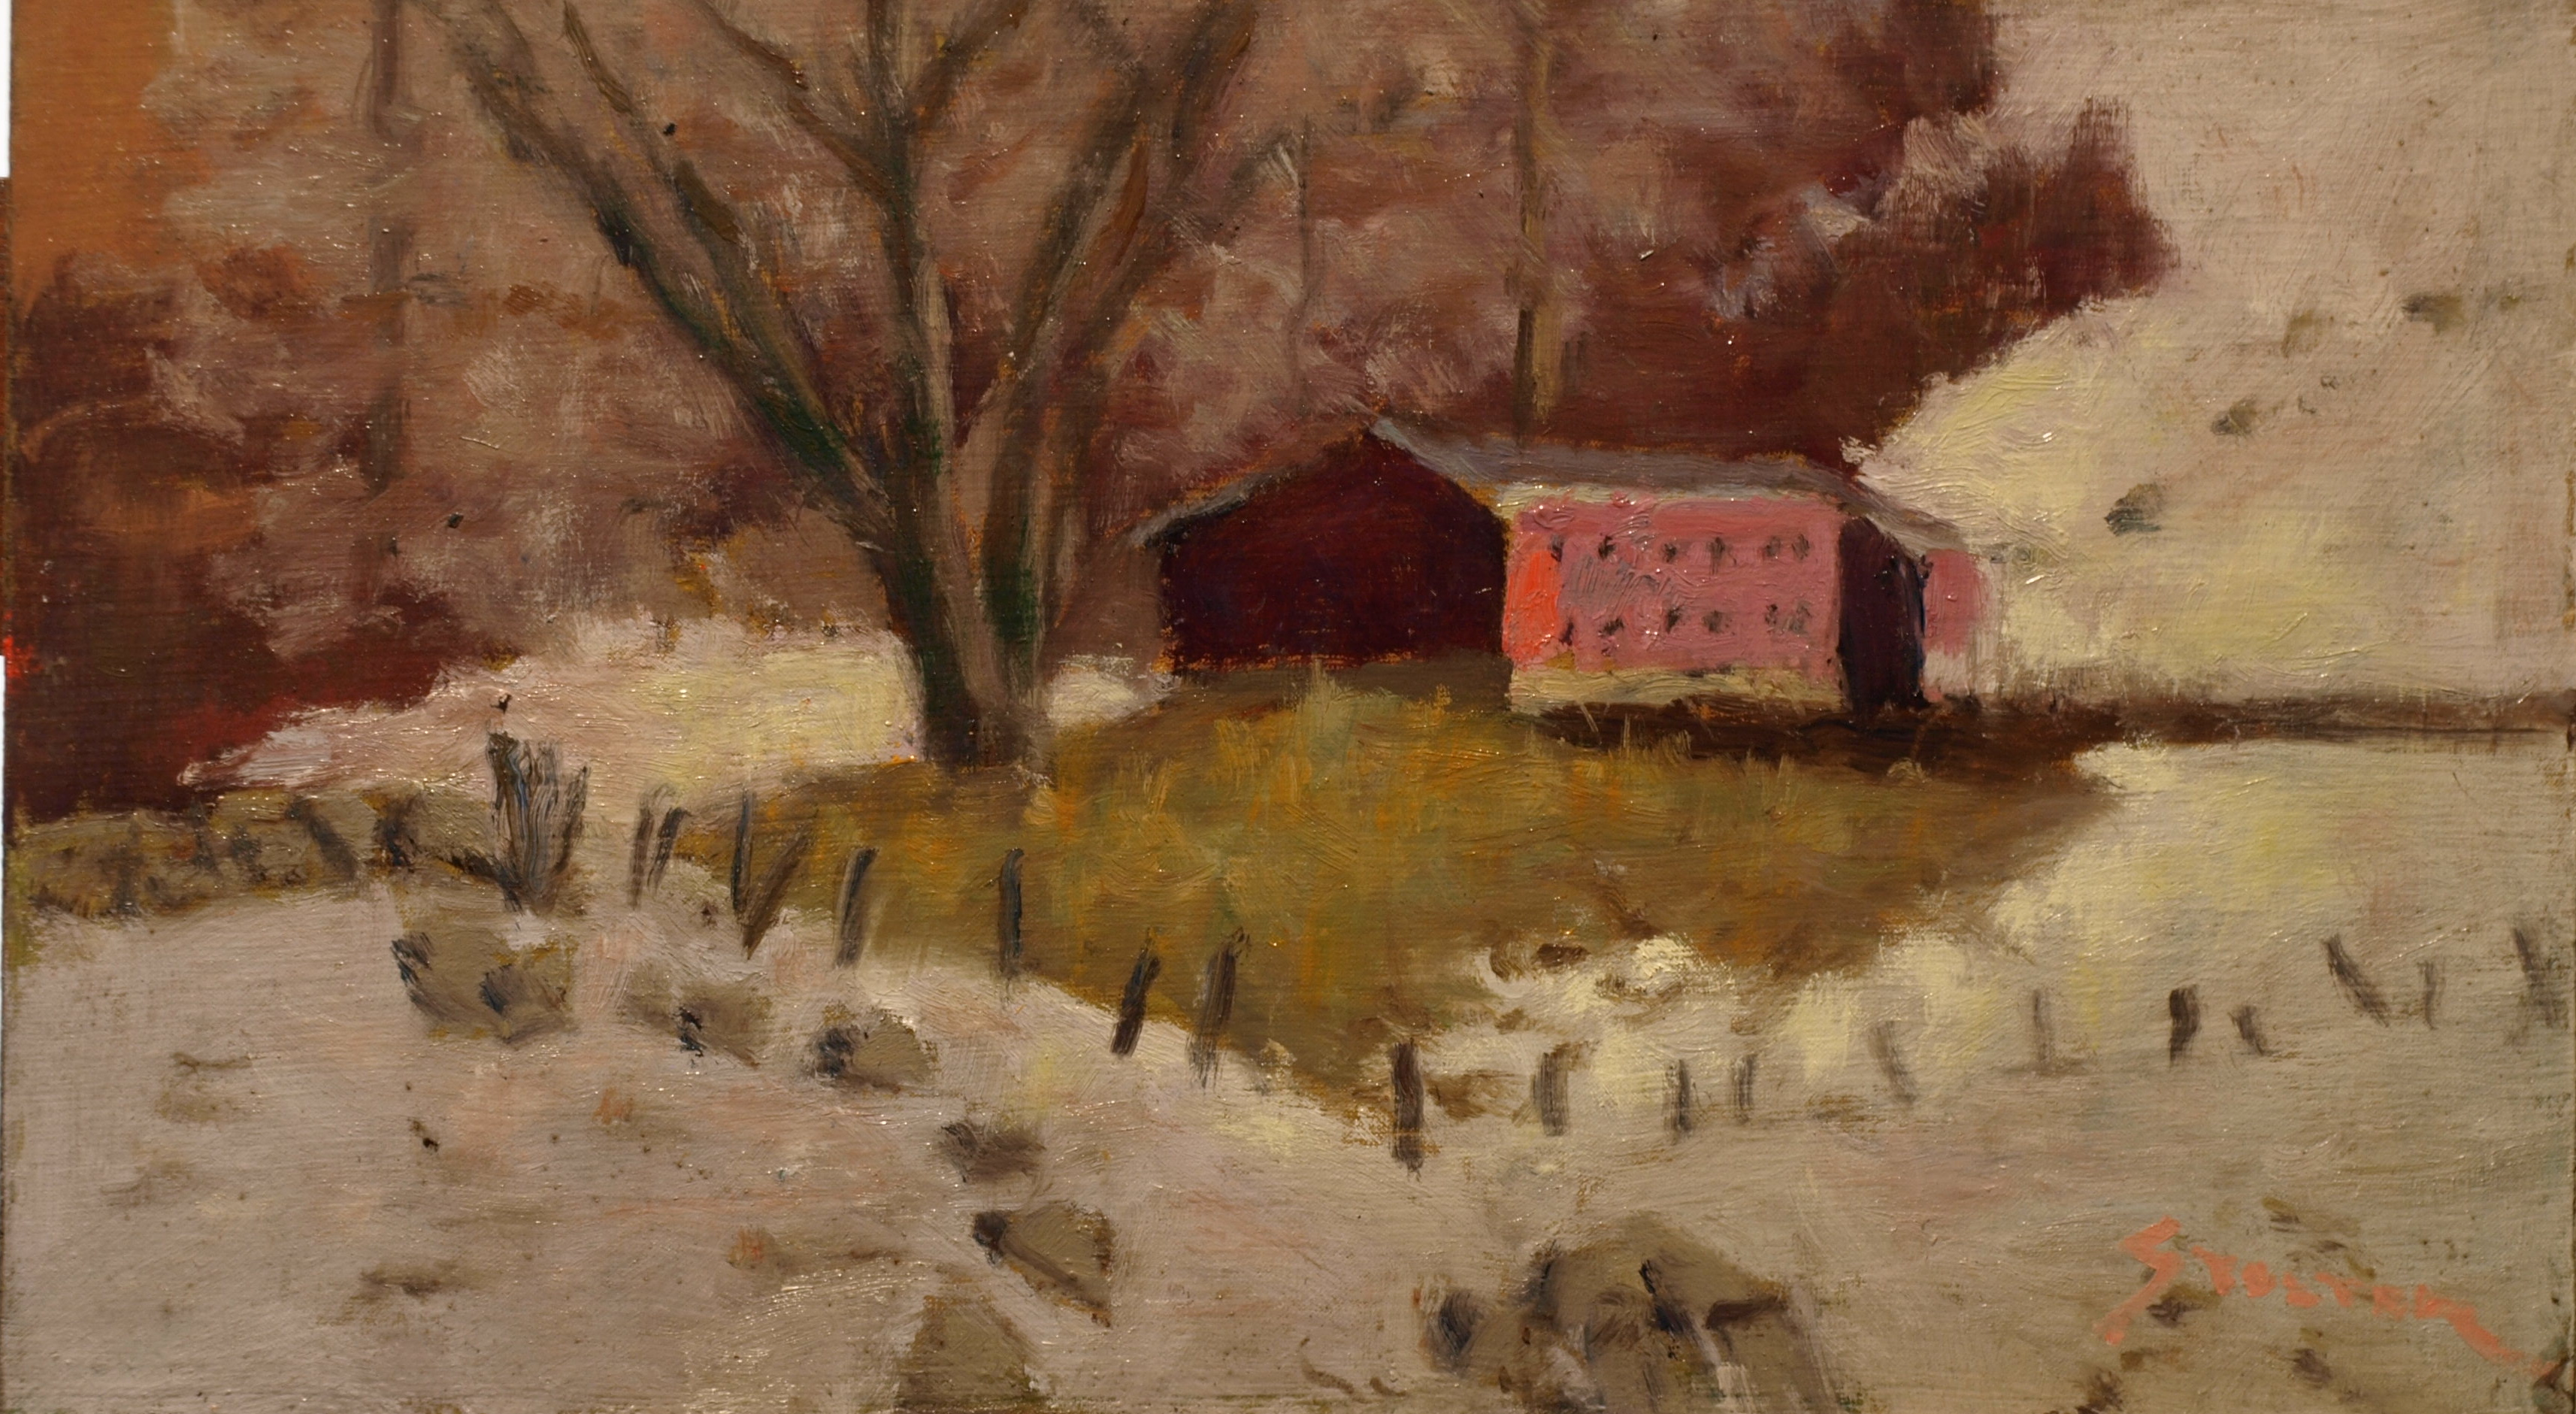 Abode of Chickens, Oil on Canvas on Panel, 8 x 14 Inches, by Richard Stalter, $225